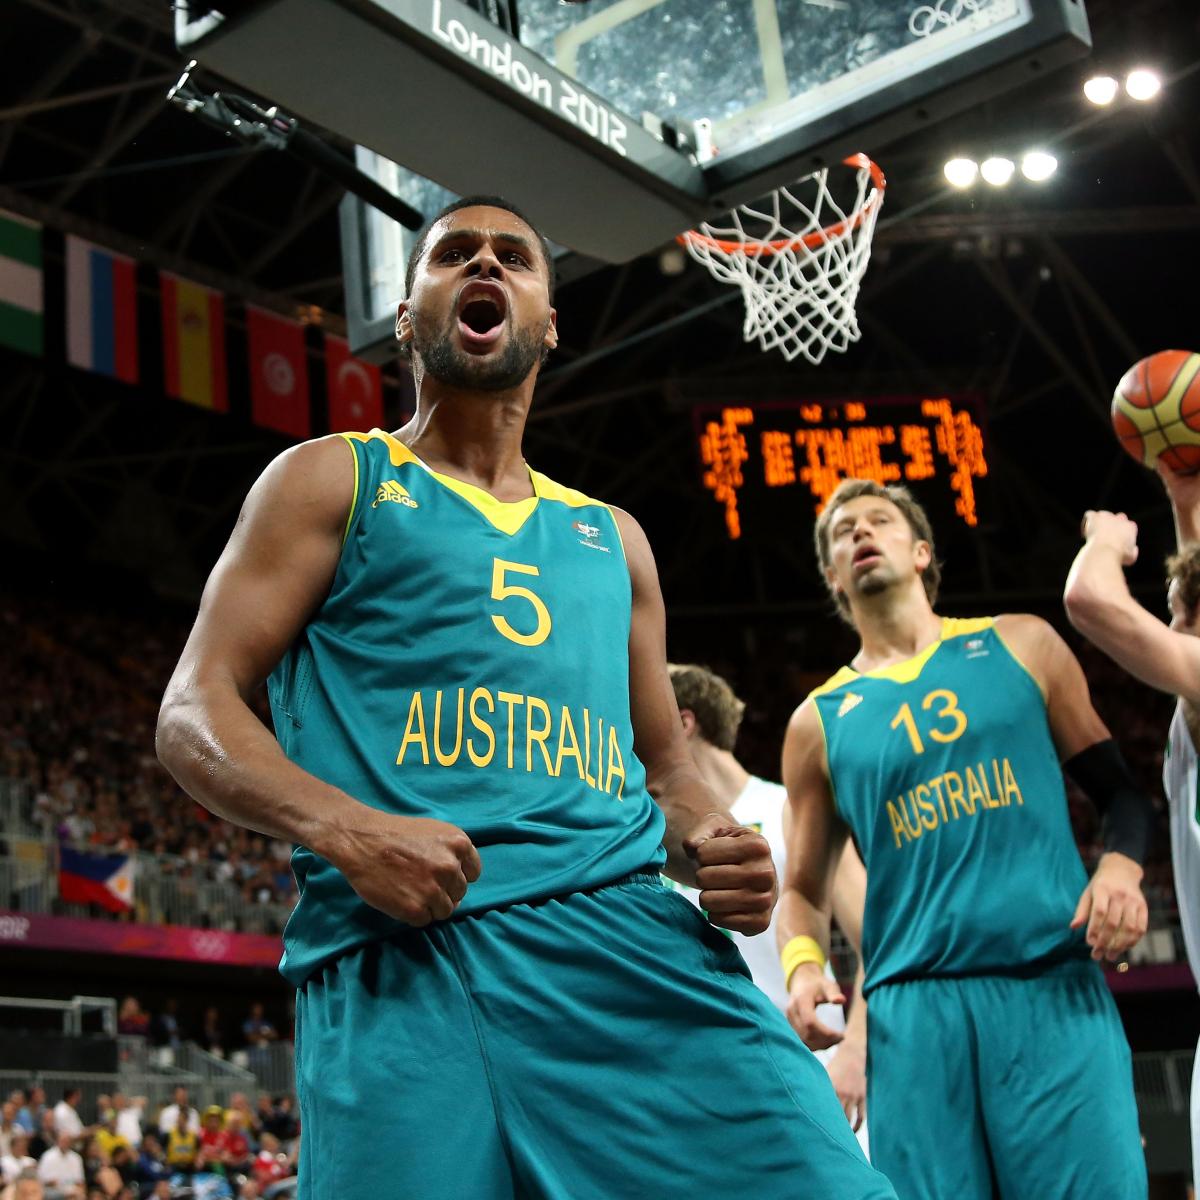 Australia Vs Spain Live Score Stats And Recap For Olympic Basketball Showdown Bleacher Report Latest News Videos And Highlights